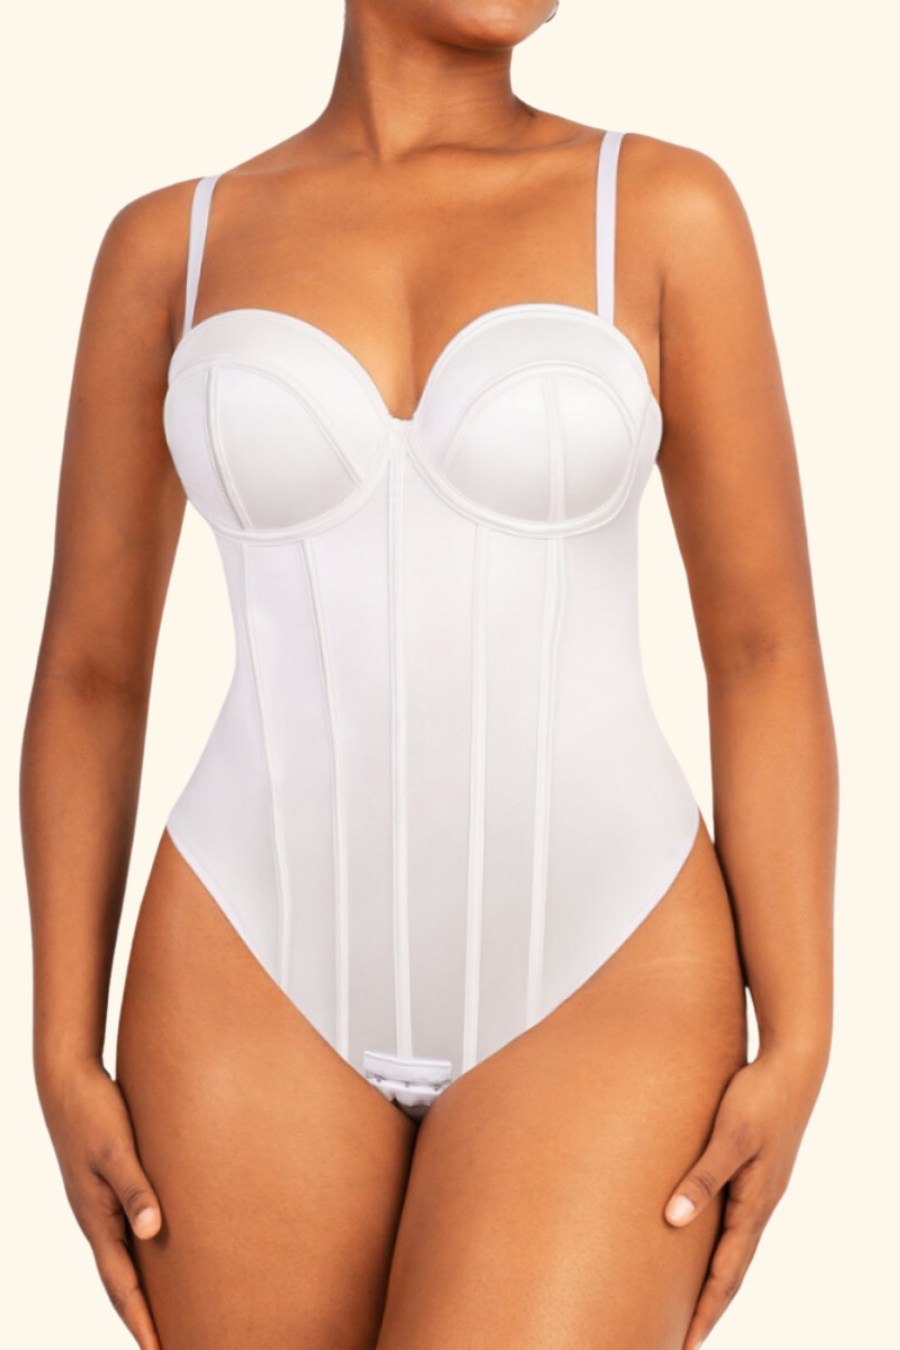 Shaping Bodysuits - Experience the Tease Shaping Bodysuit in Ivory